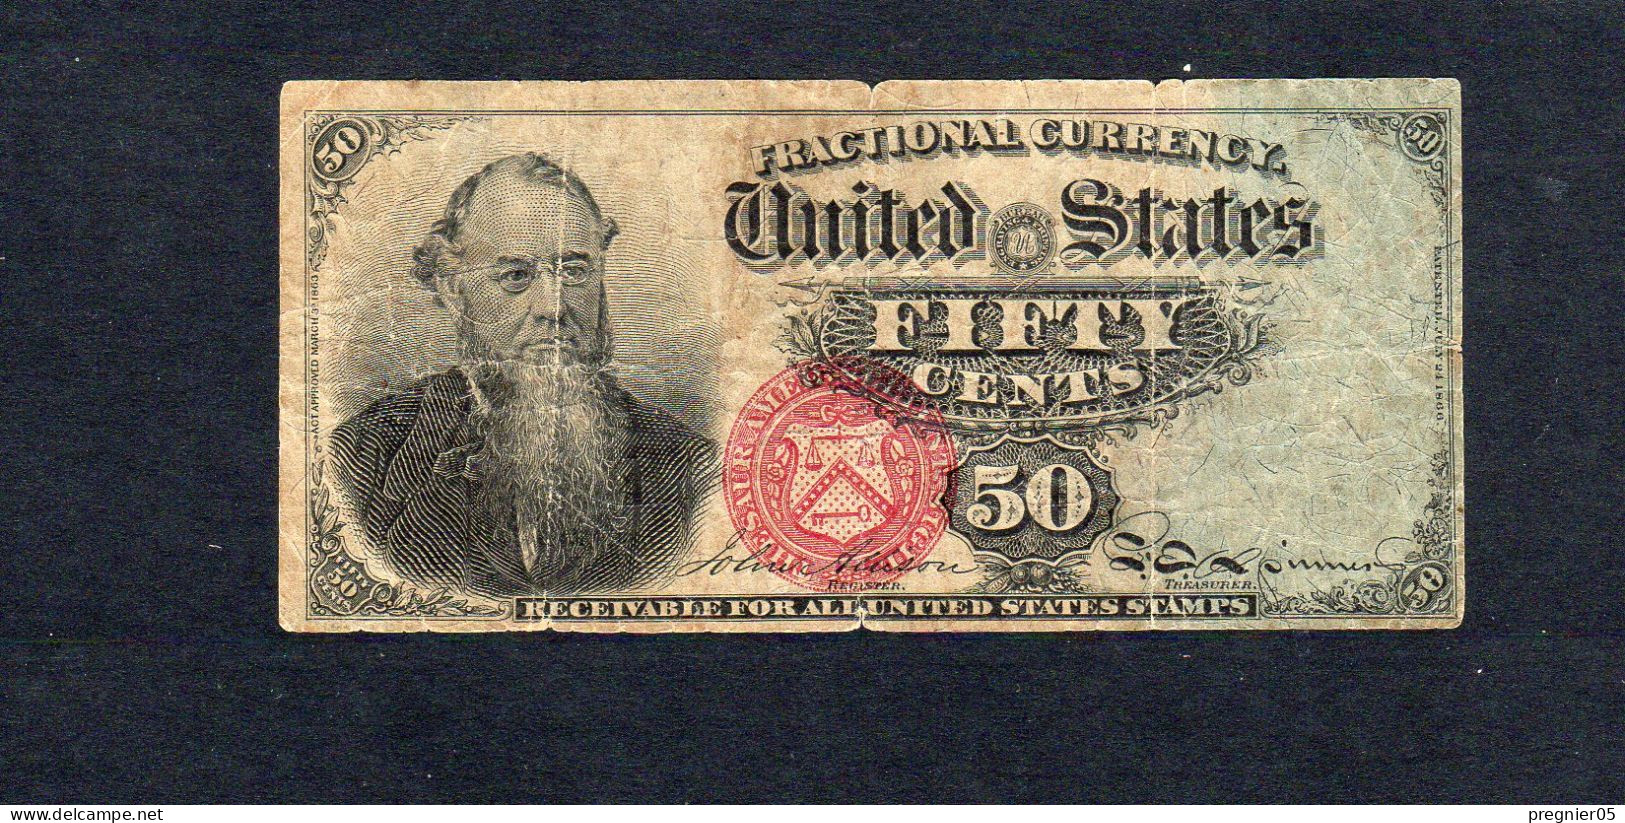 USA - Billet 50 Cents "Fractional Currency" - 4e émission 1863 TB/F P.120 - 1863 : 4 Uitgave